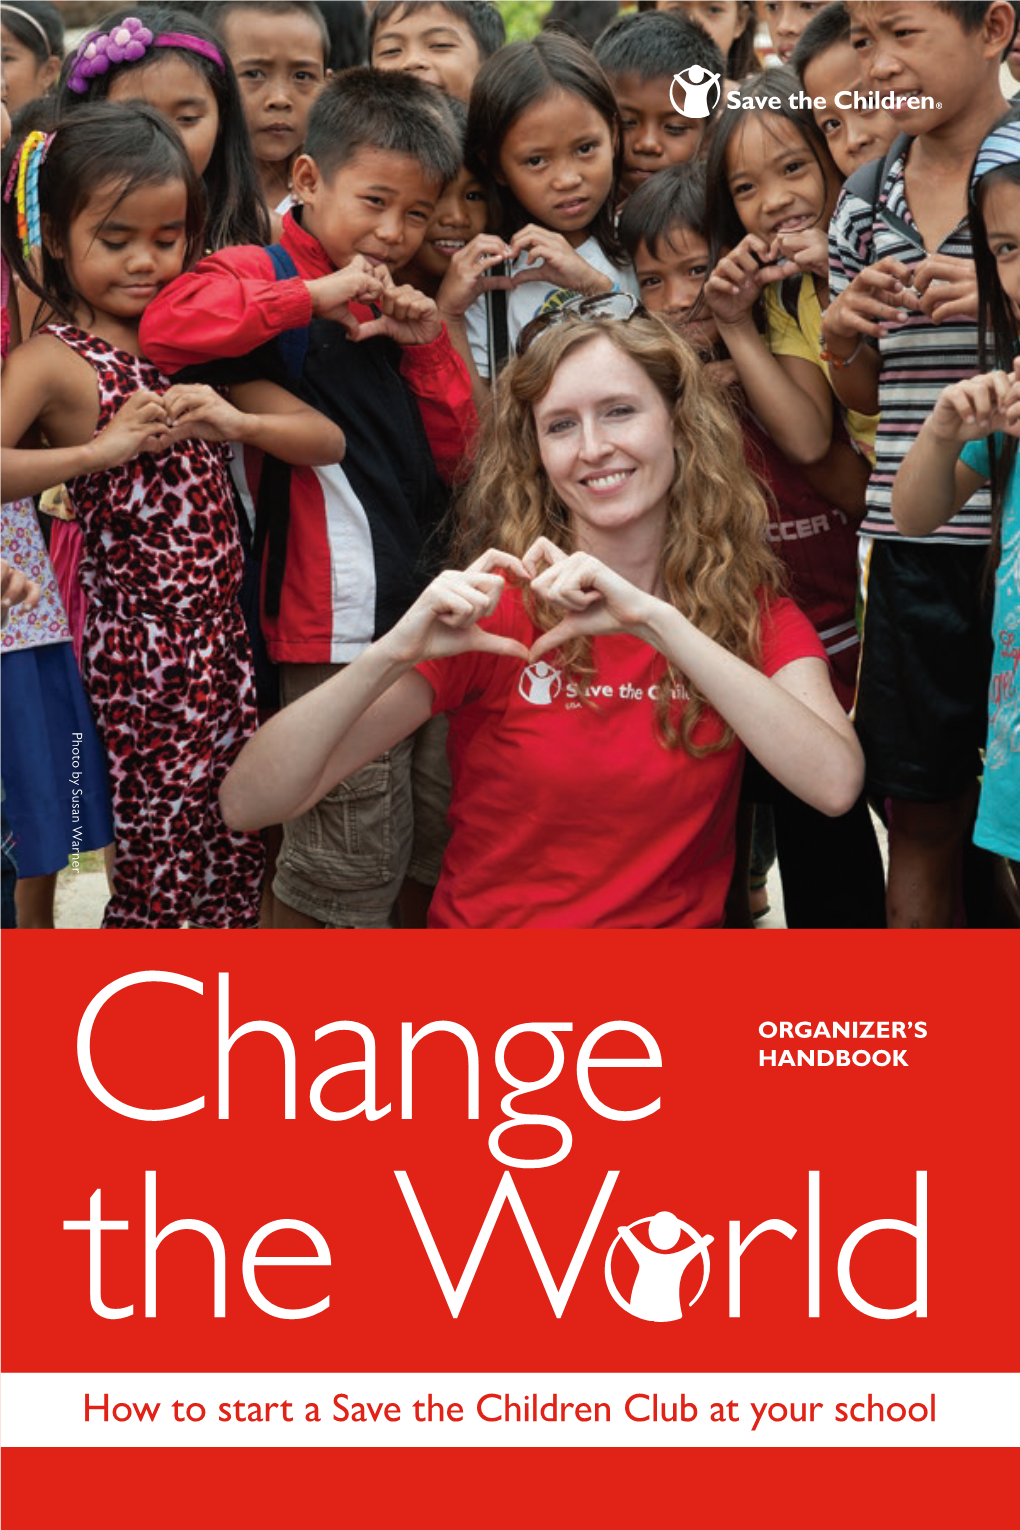 How to Start a Save the Children Club at Your School Lead the Way! As High School and College Students, You Have an Incredible Opportunity to Change the World